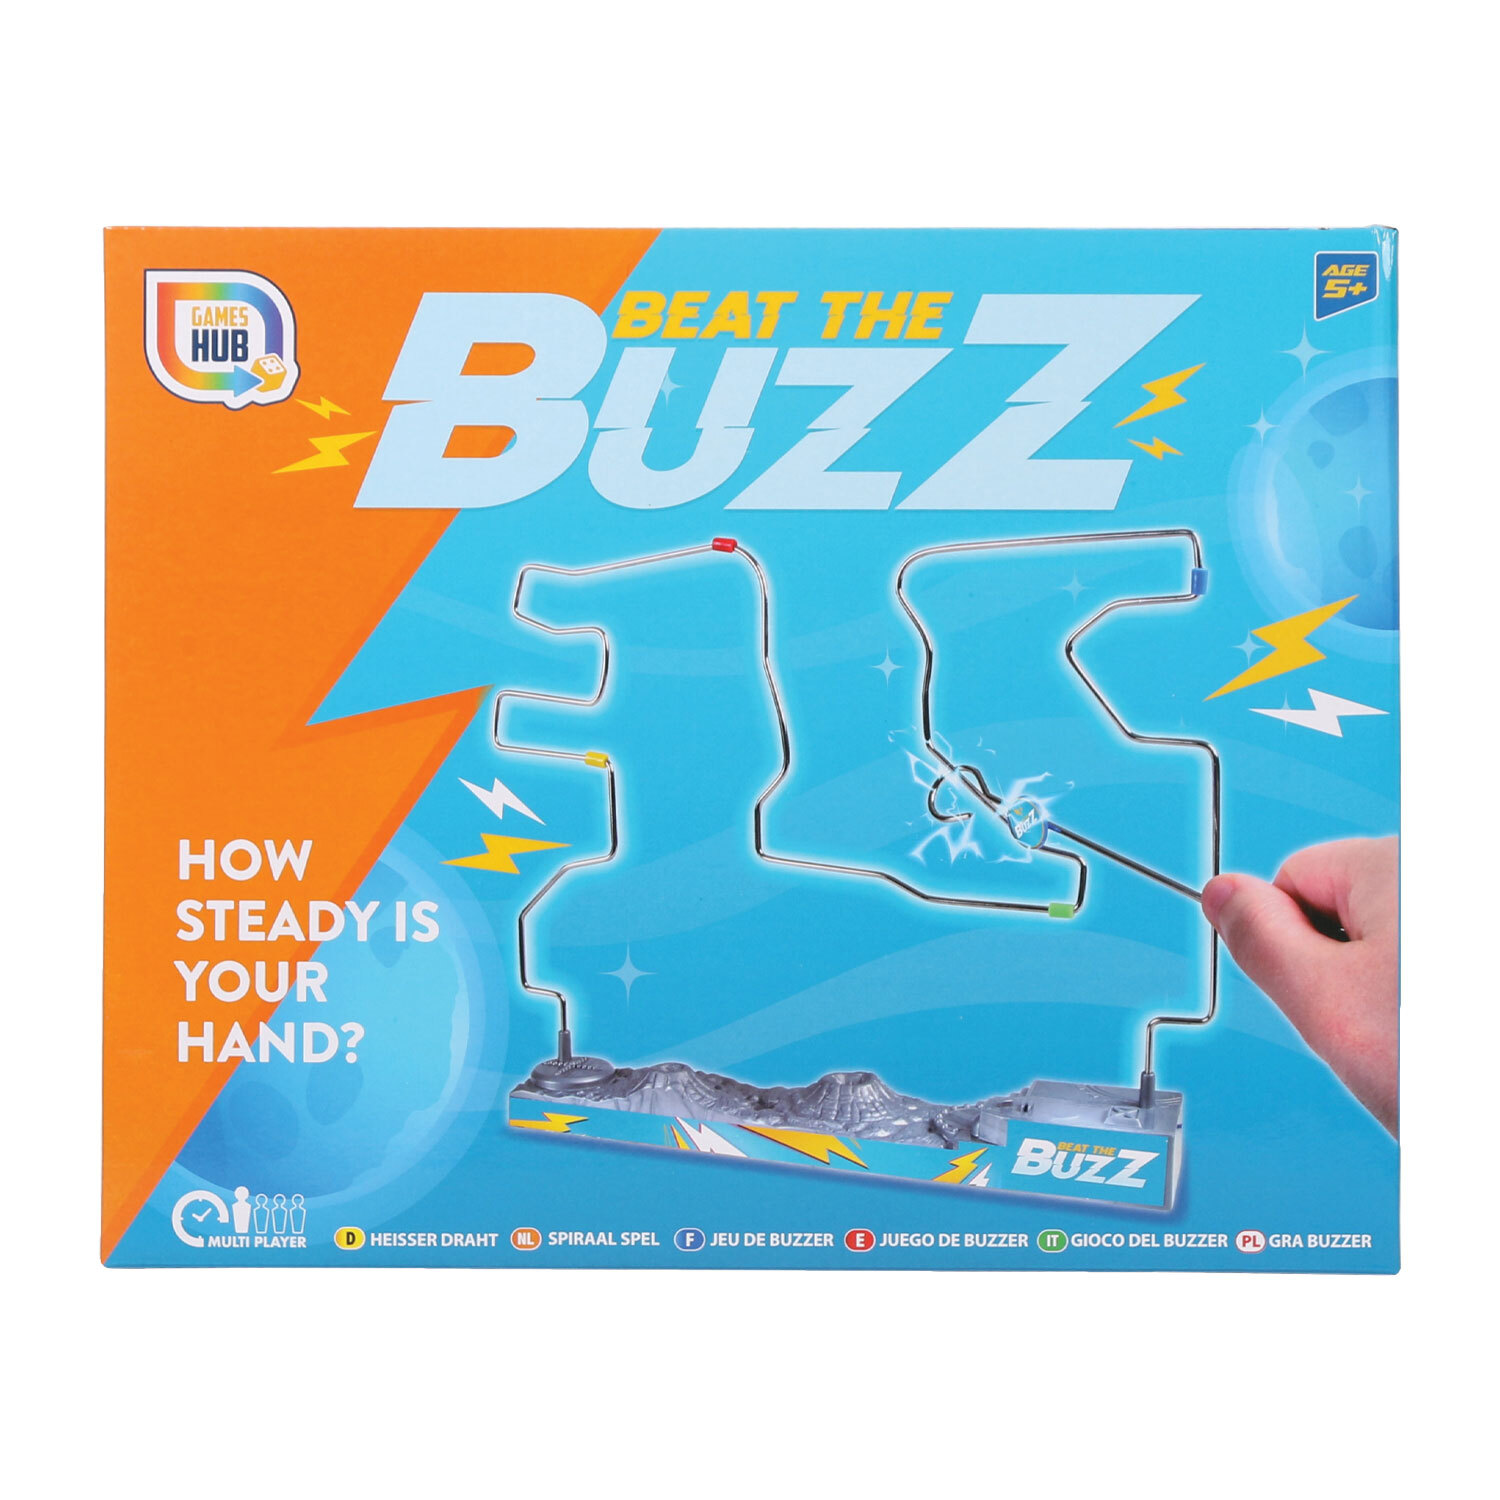 Beat the Buzz Image